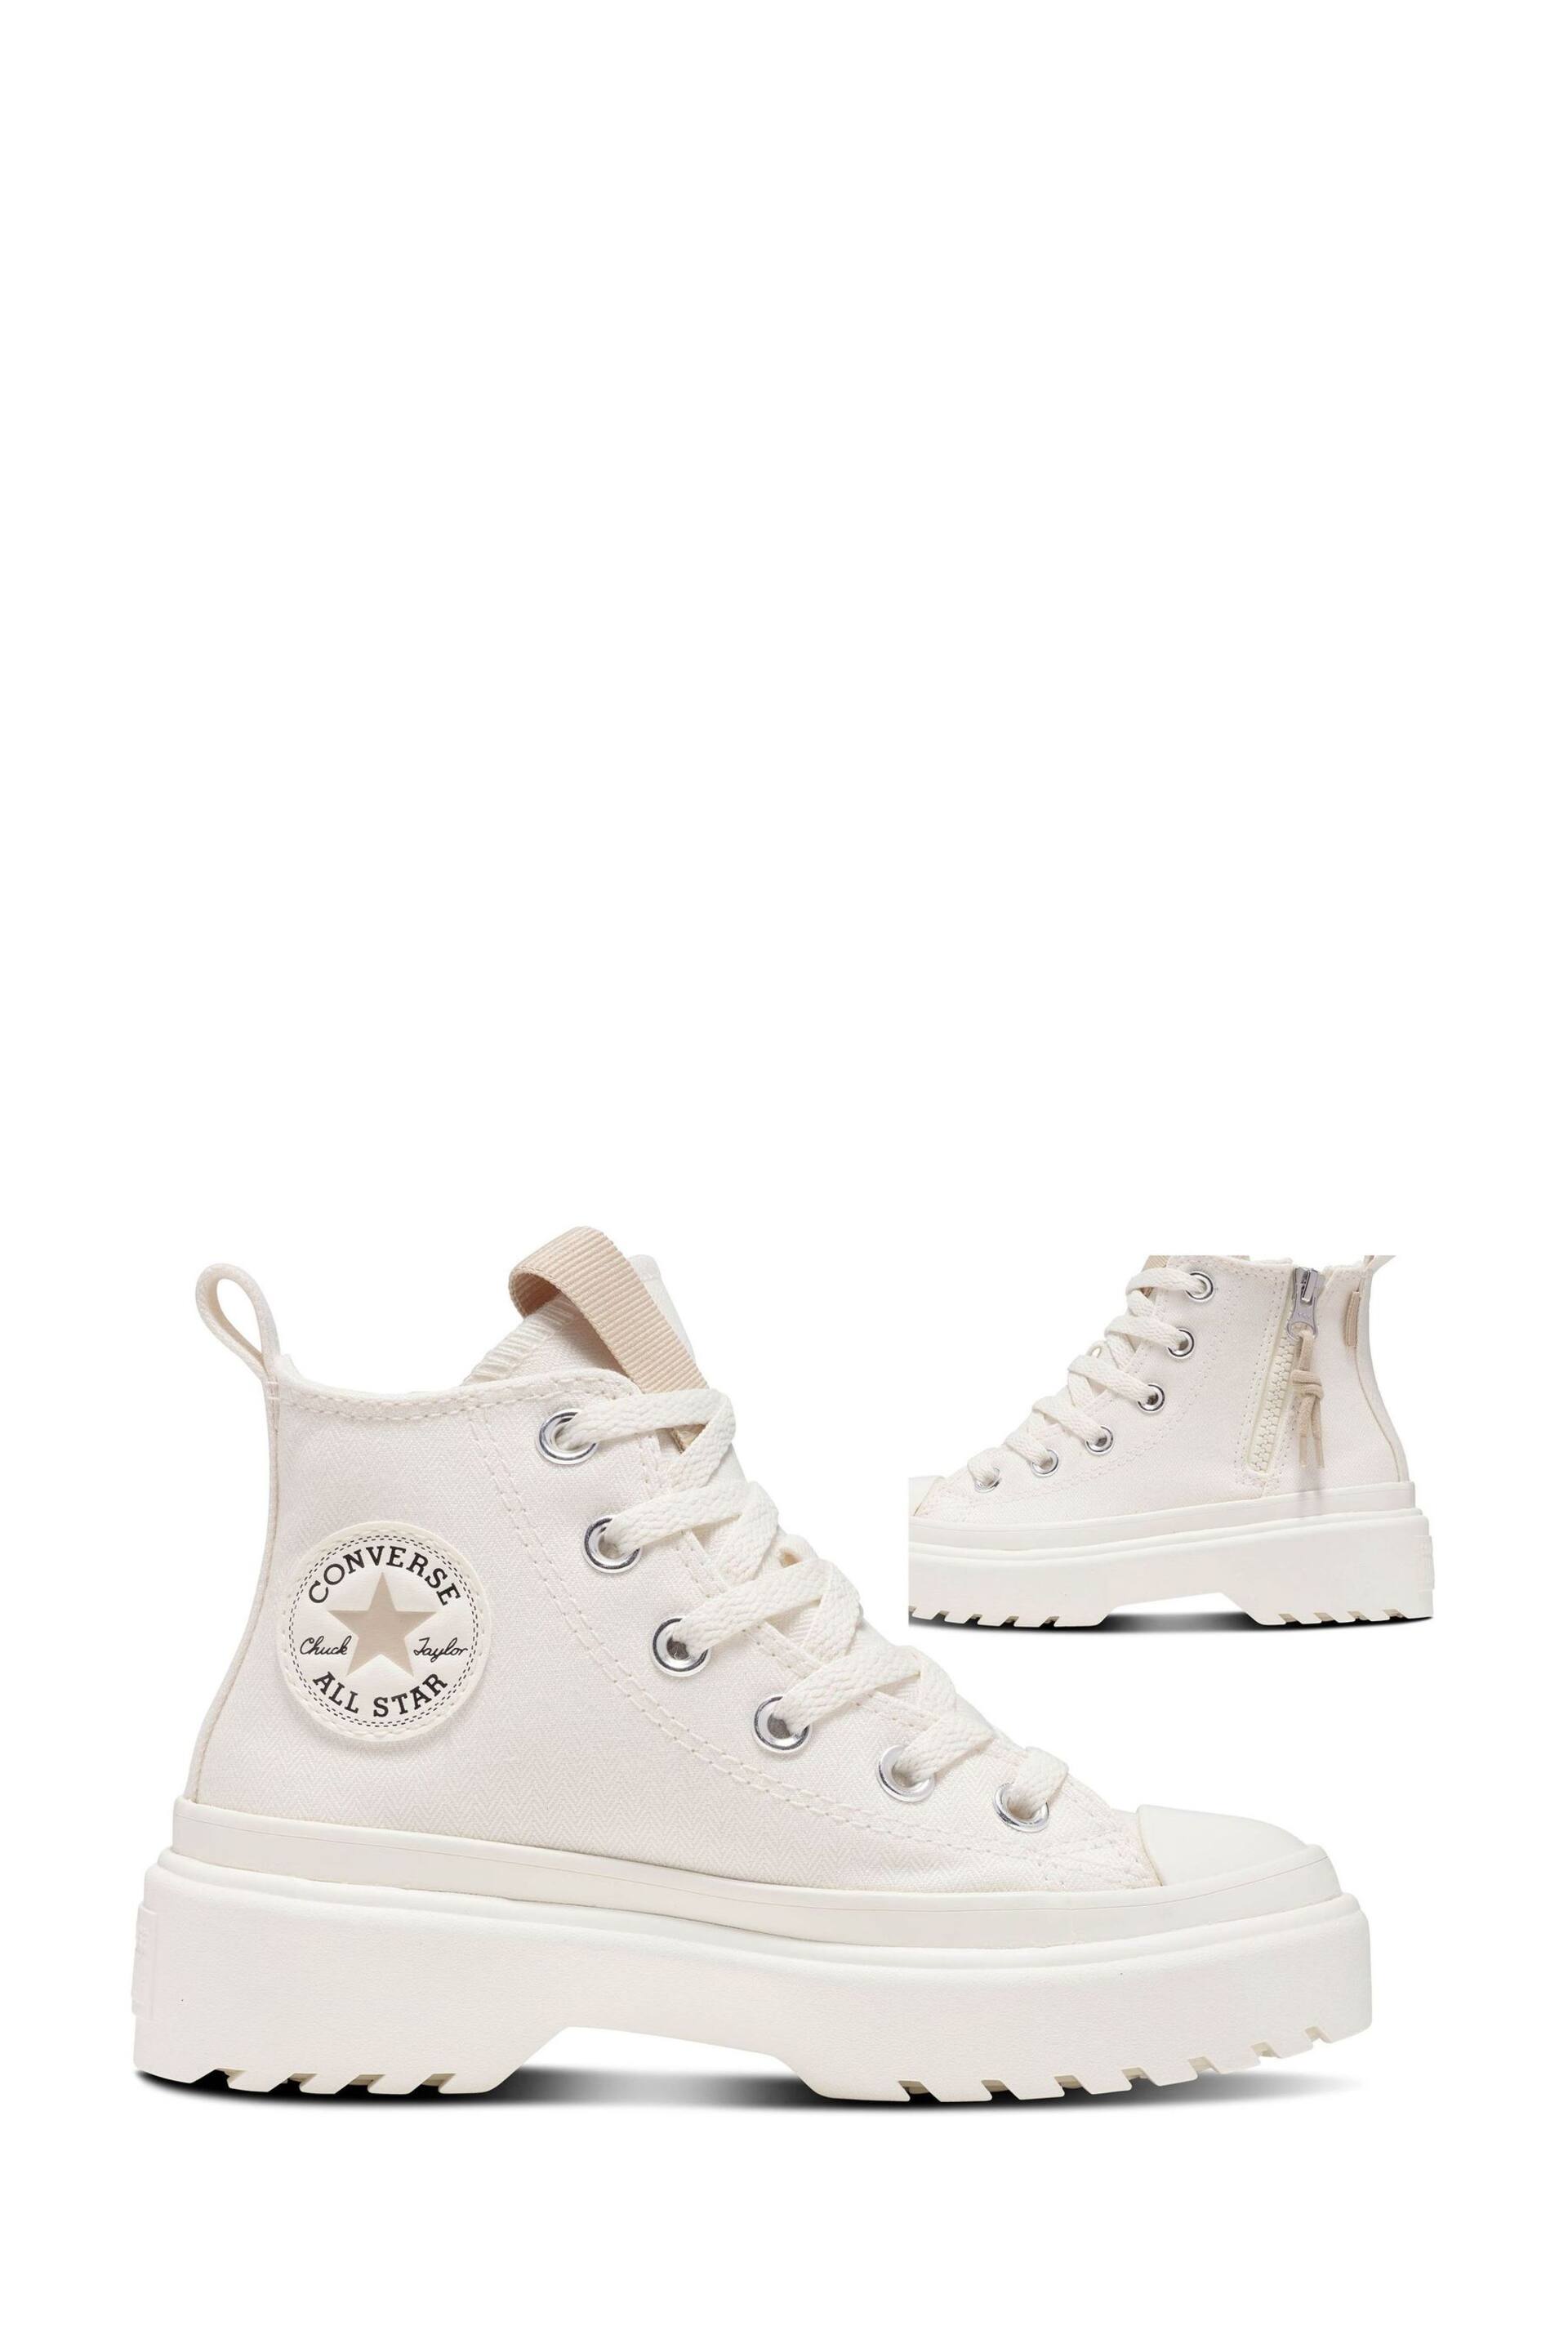 Converse Cream Lugged Lift Junior Trainers - Image 9 of 10